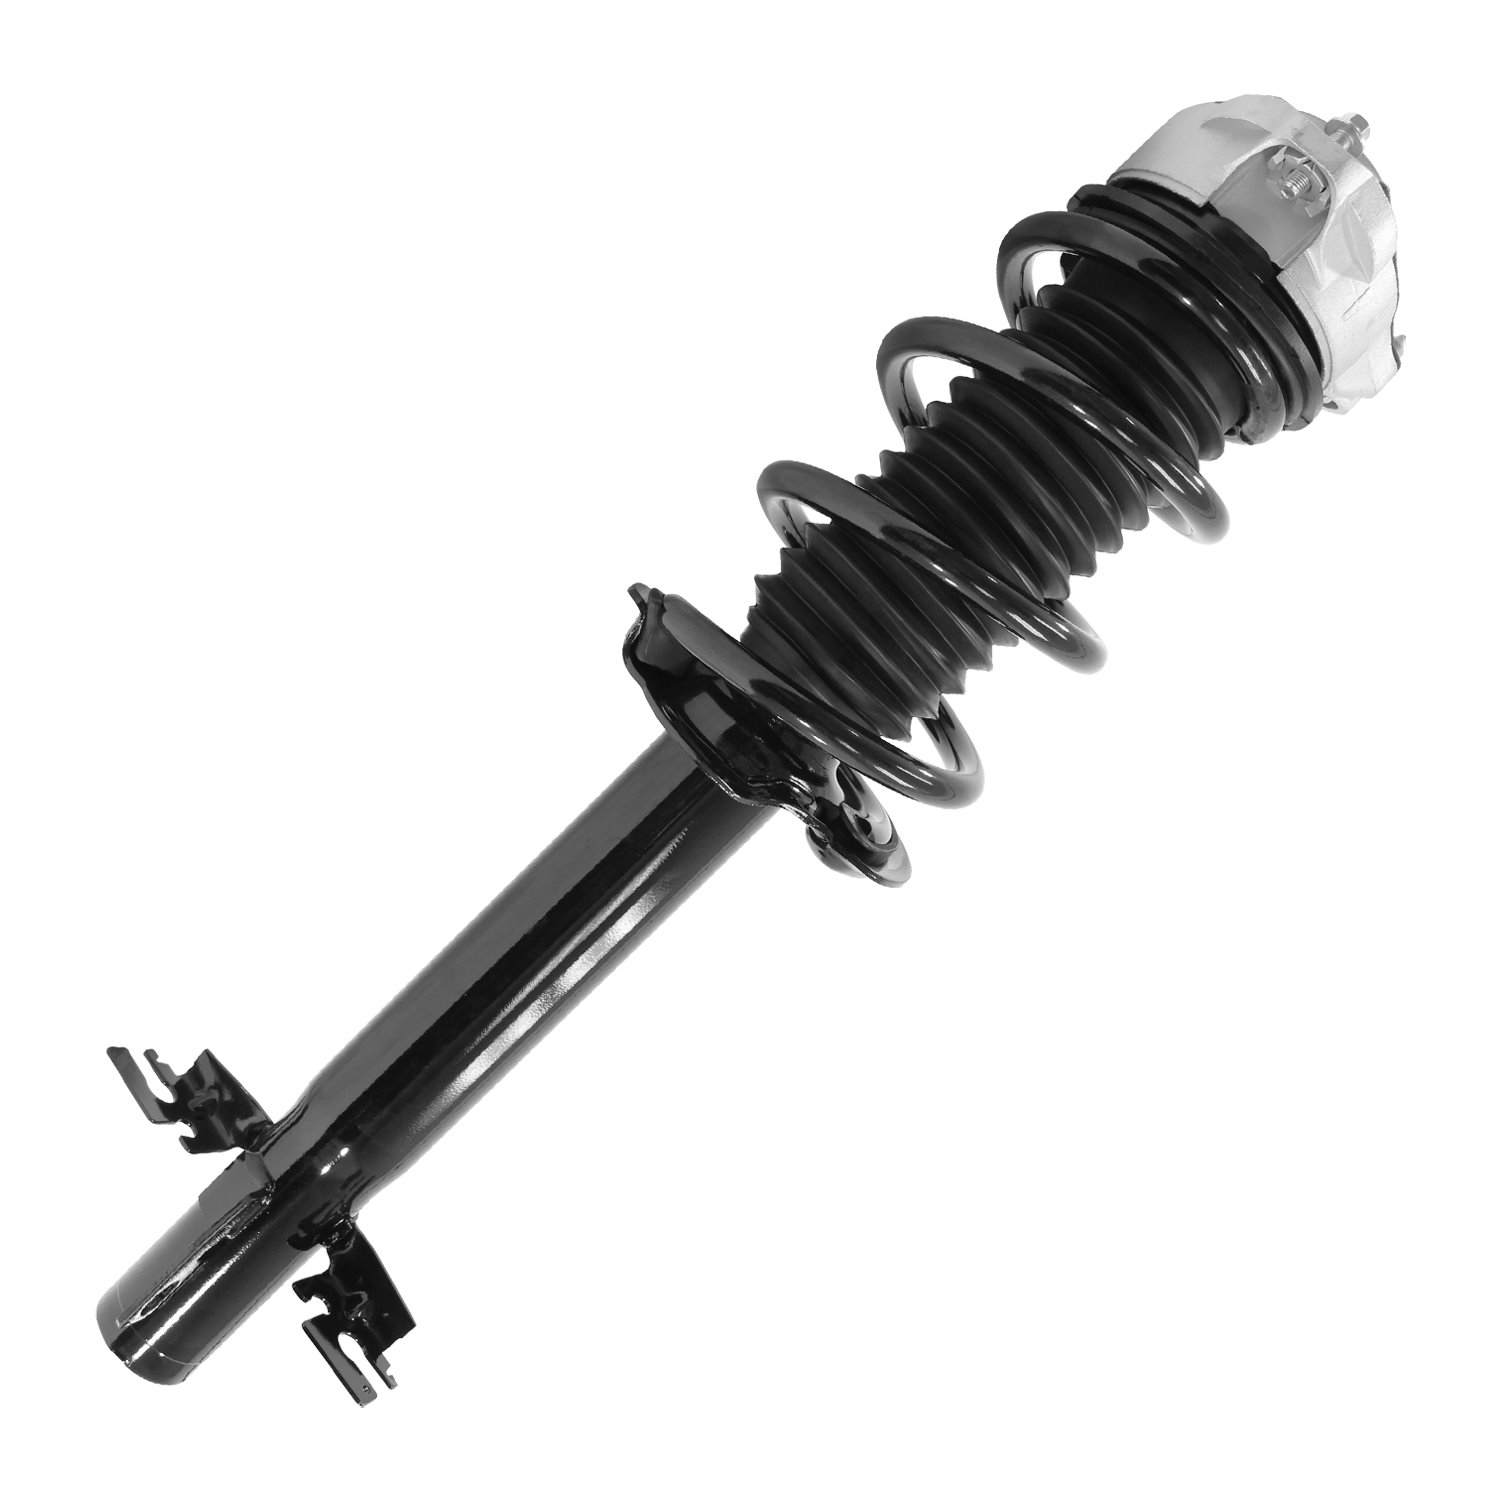 13421 Front Suspension Strut & Coil Spring Assemby Fits Select Ram ProMaster 1500, Ram ProMaster 2500, Ram ProMaster 3500